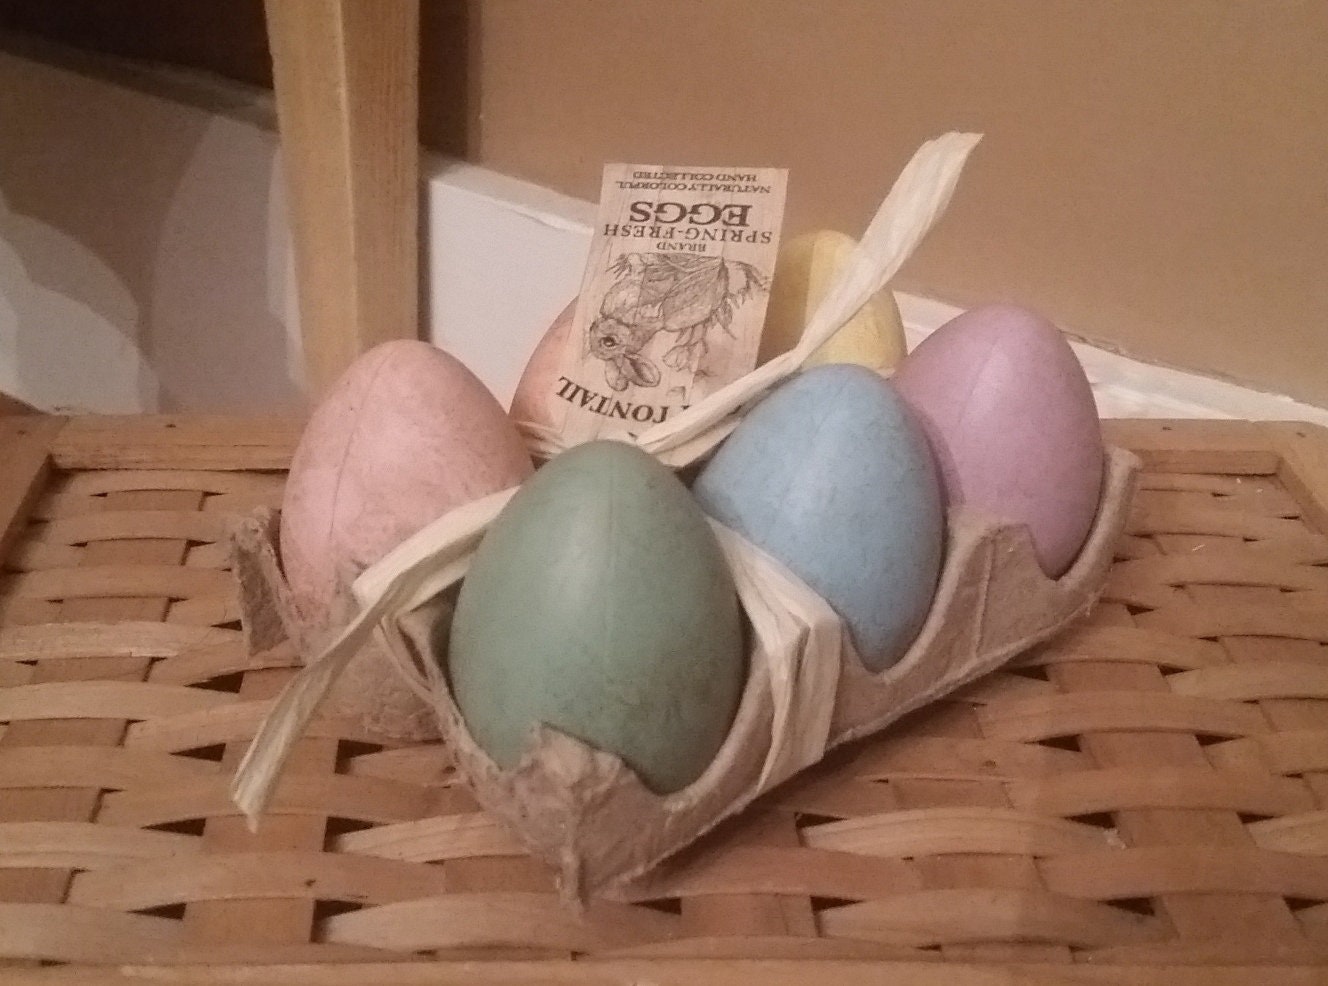 Wooden Eggs – Biddle and Bop